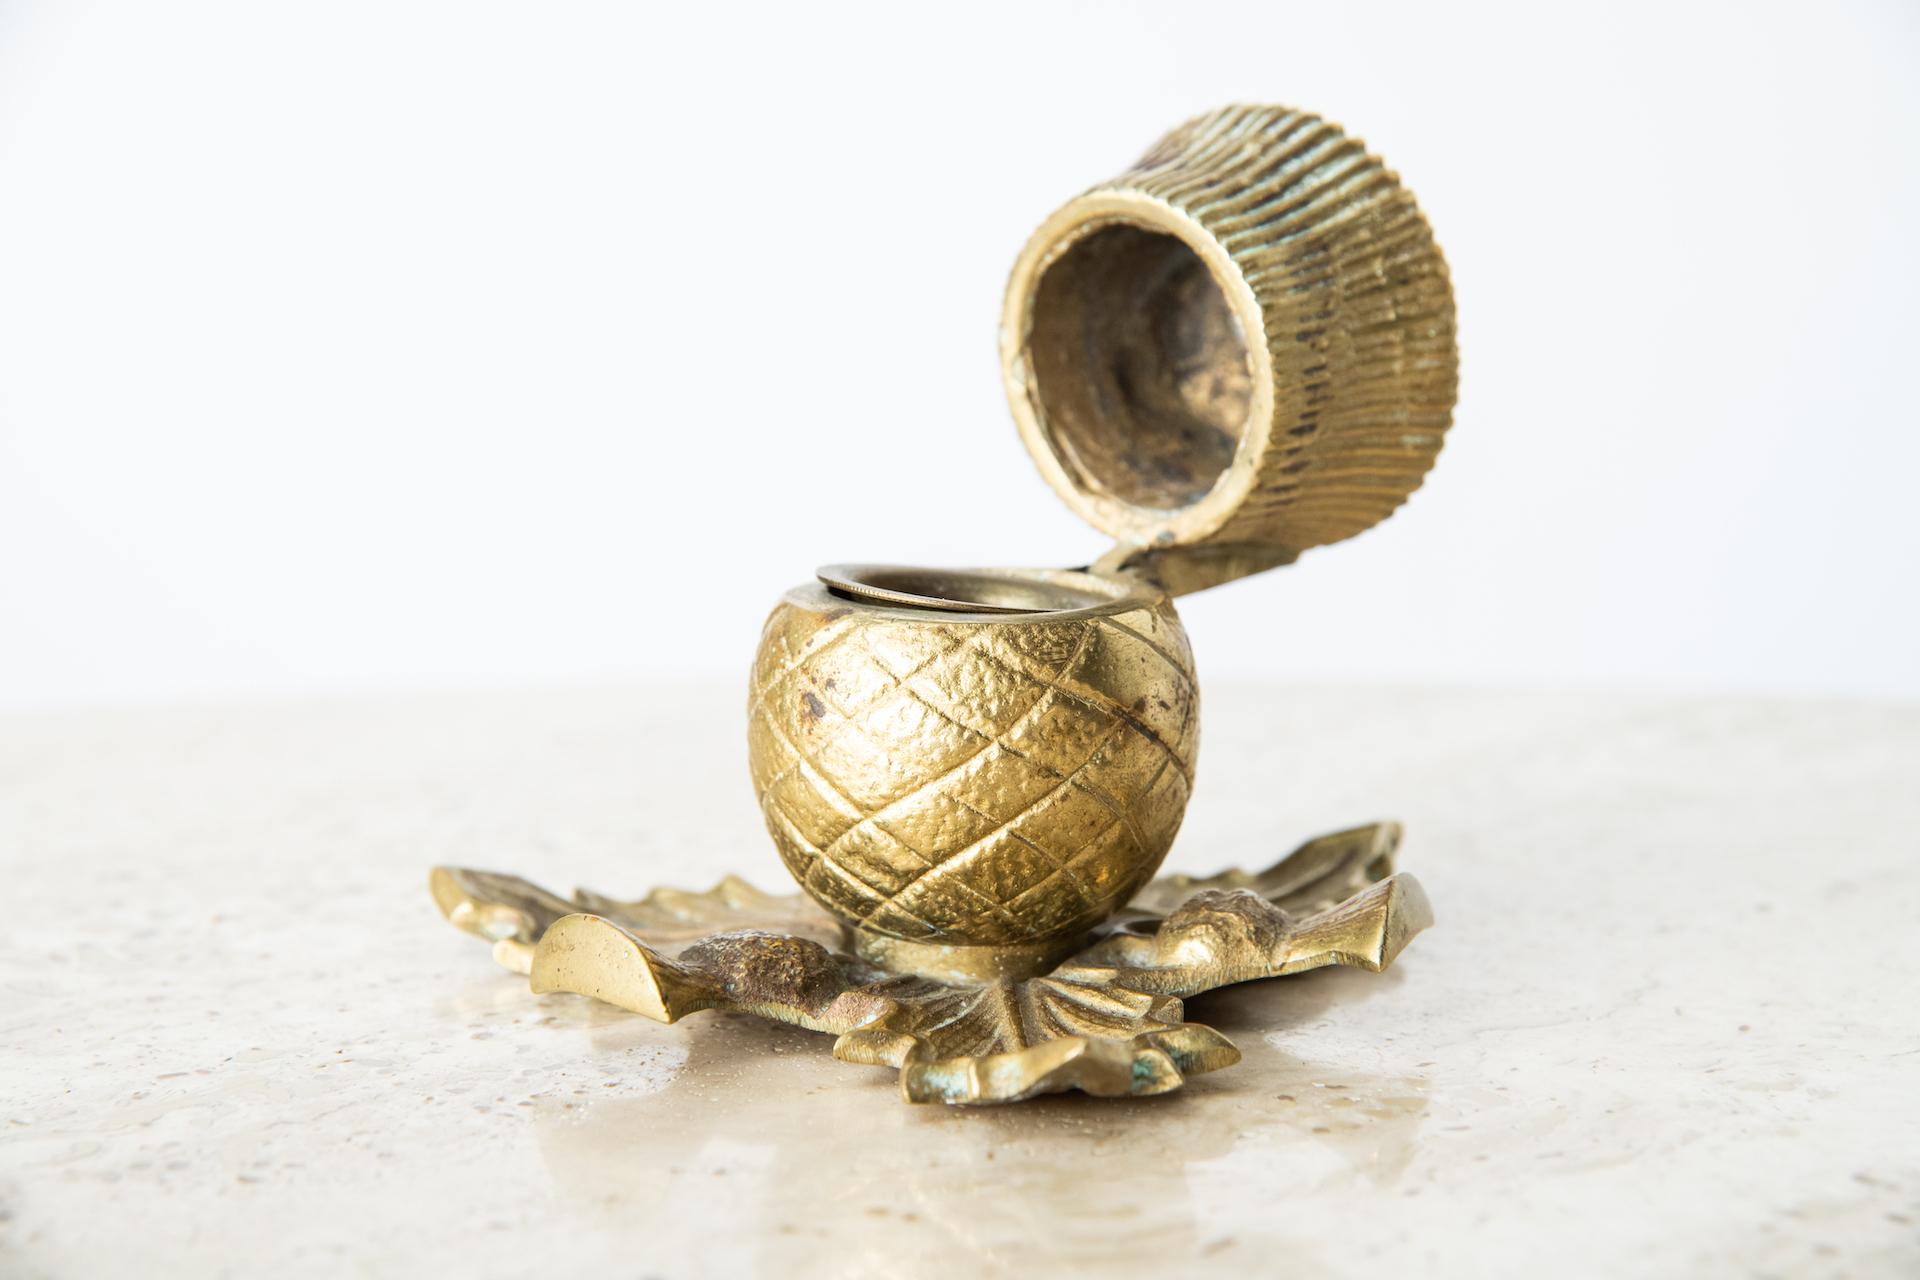 Cast brass inkwell with removable well in the form of a Scottish thistle.